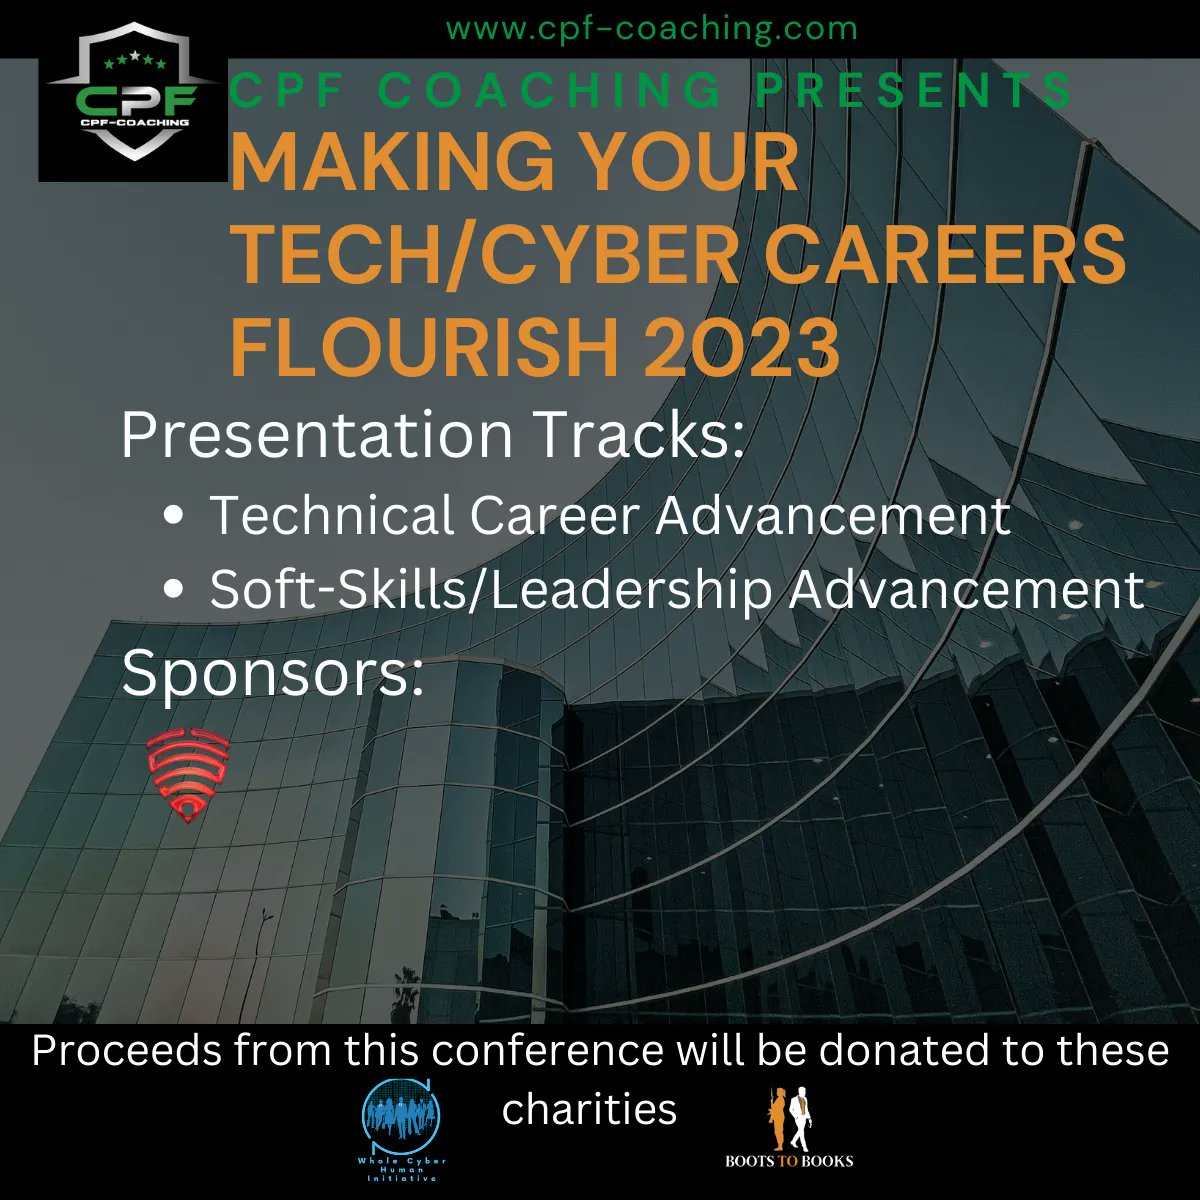 Are you looking to make your tech or cyber career flourish in 2023? Our virtual conference has you covered. Hear from industry experts and learn valuable strategies to succeed in the coming year. Register now! #techcareer #cybercareer #conference buff.ly/3QnfoFi